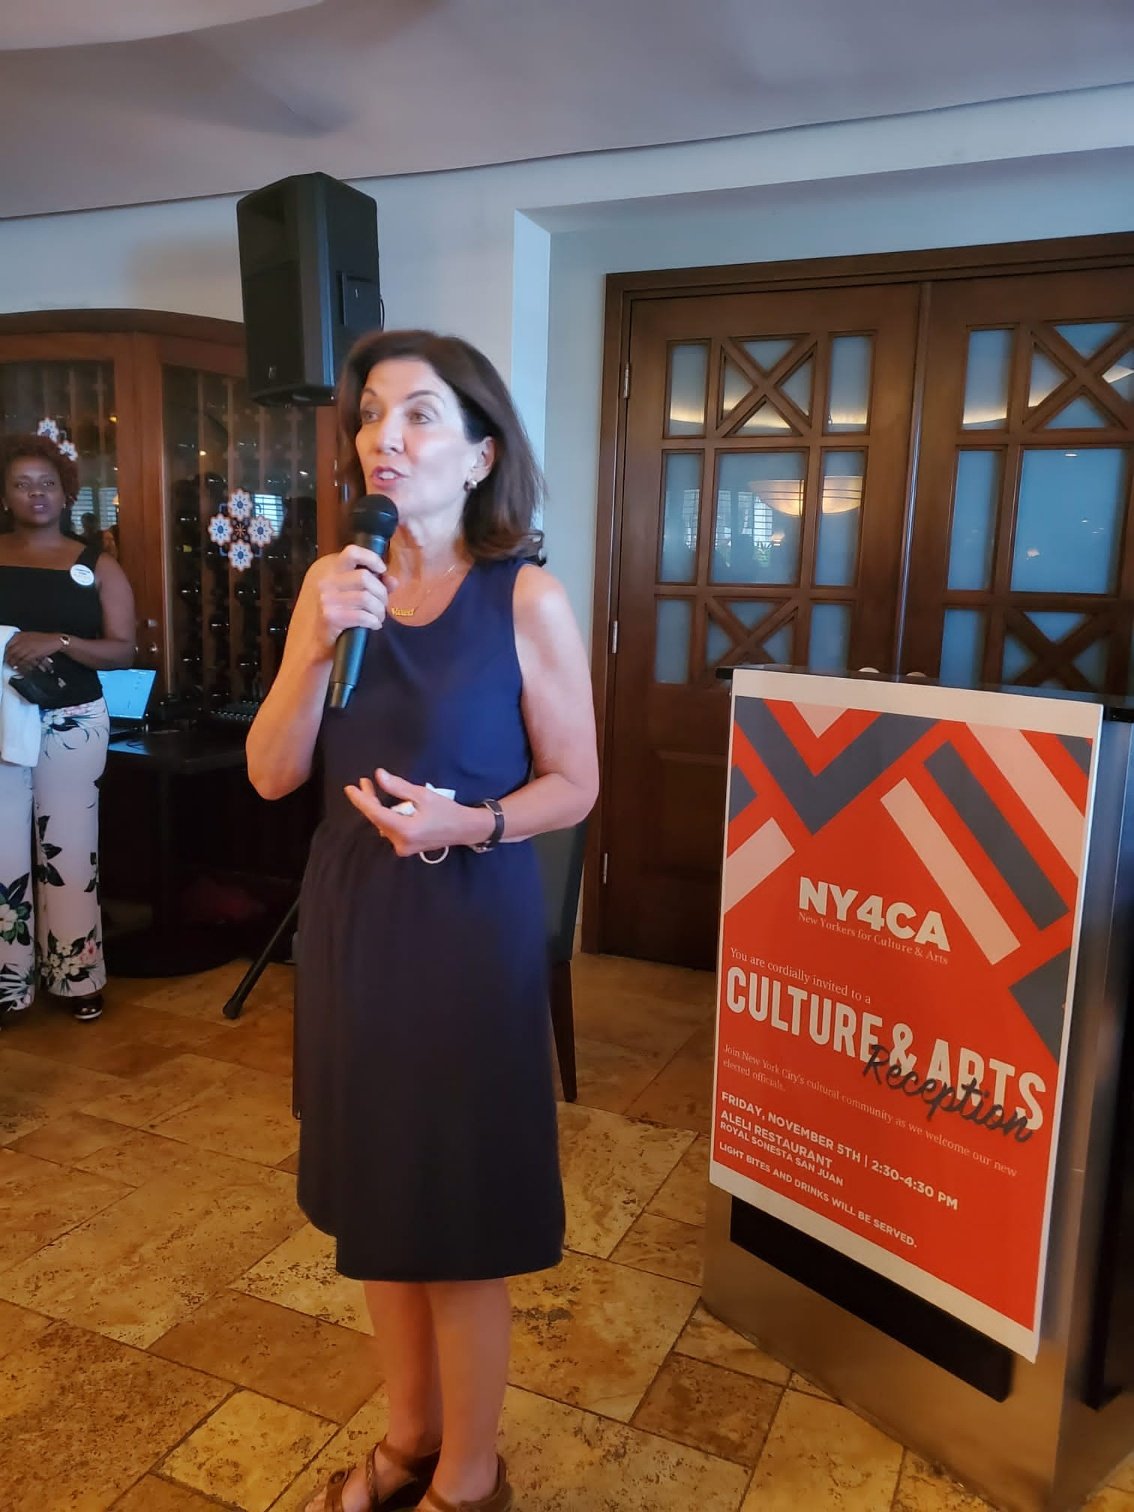  Kathy Hochul speaks into a microphone standing in front of a podium that features a “NY4CA Culture &amp; Arts reception” banner 